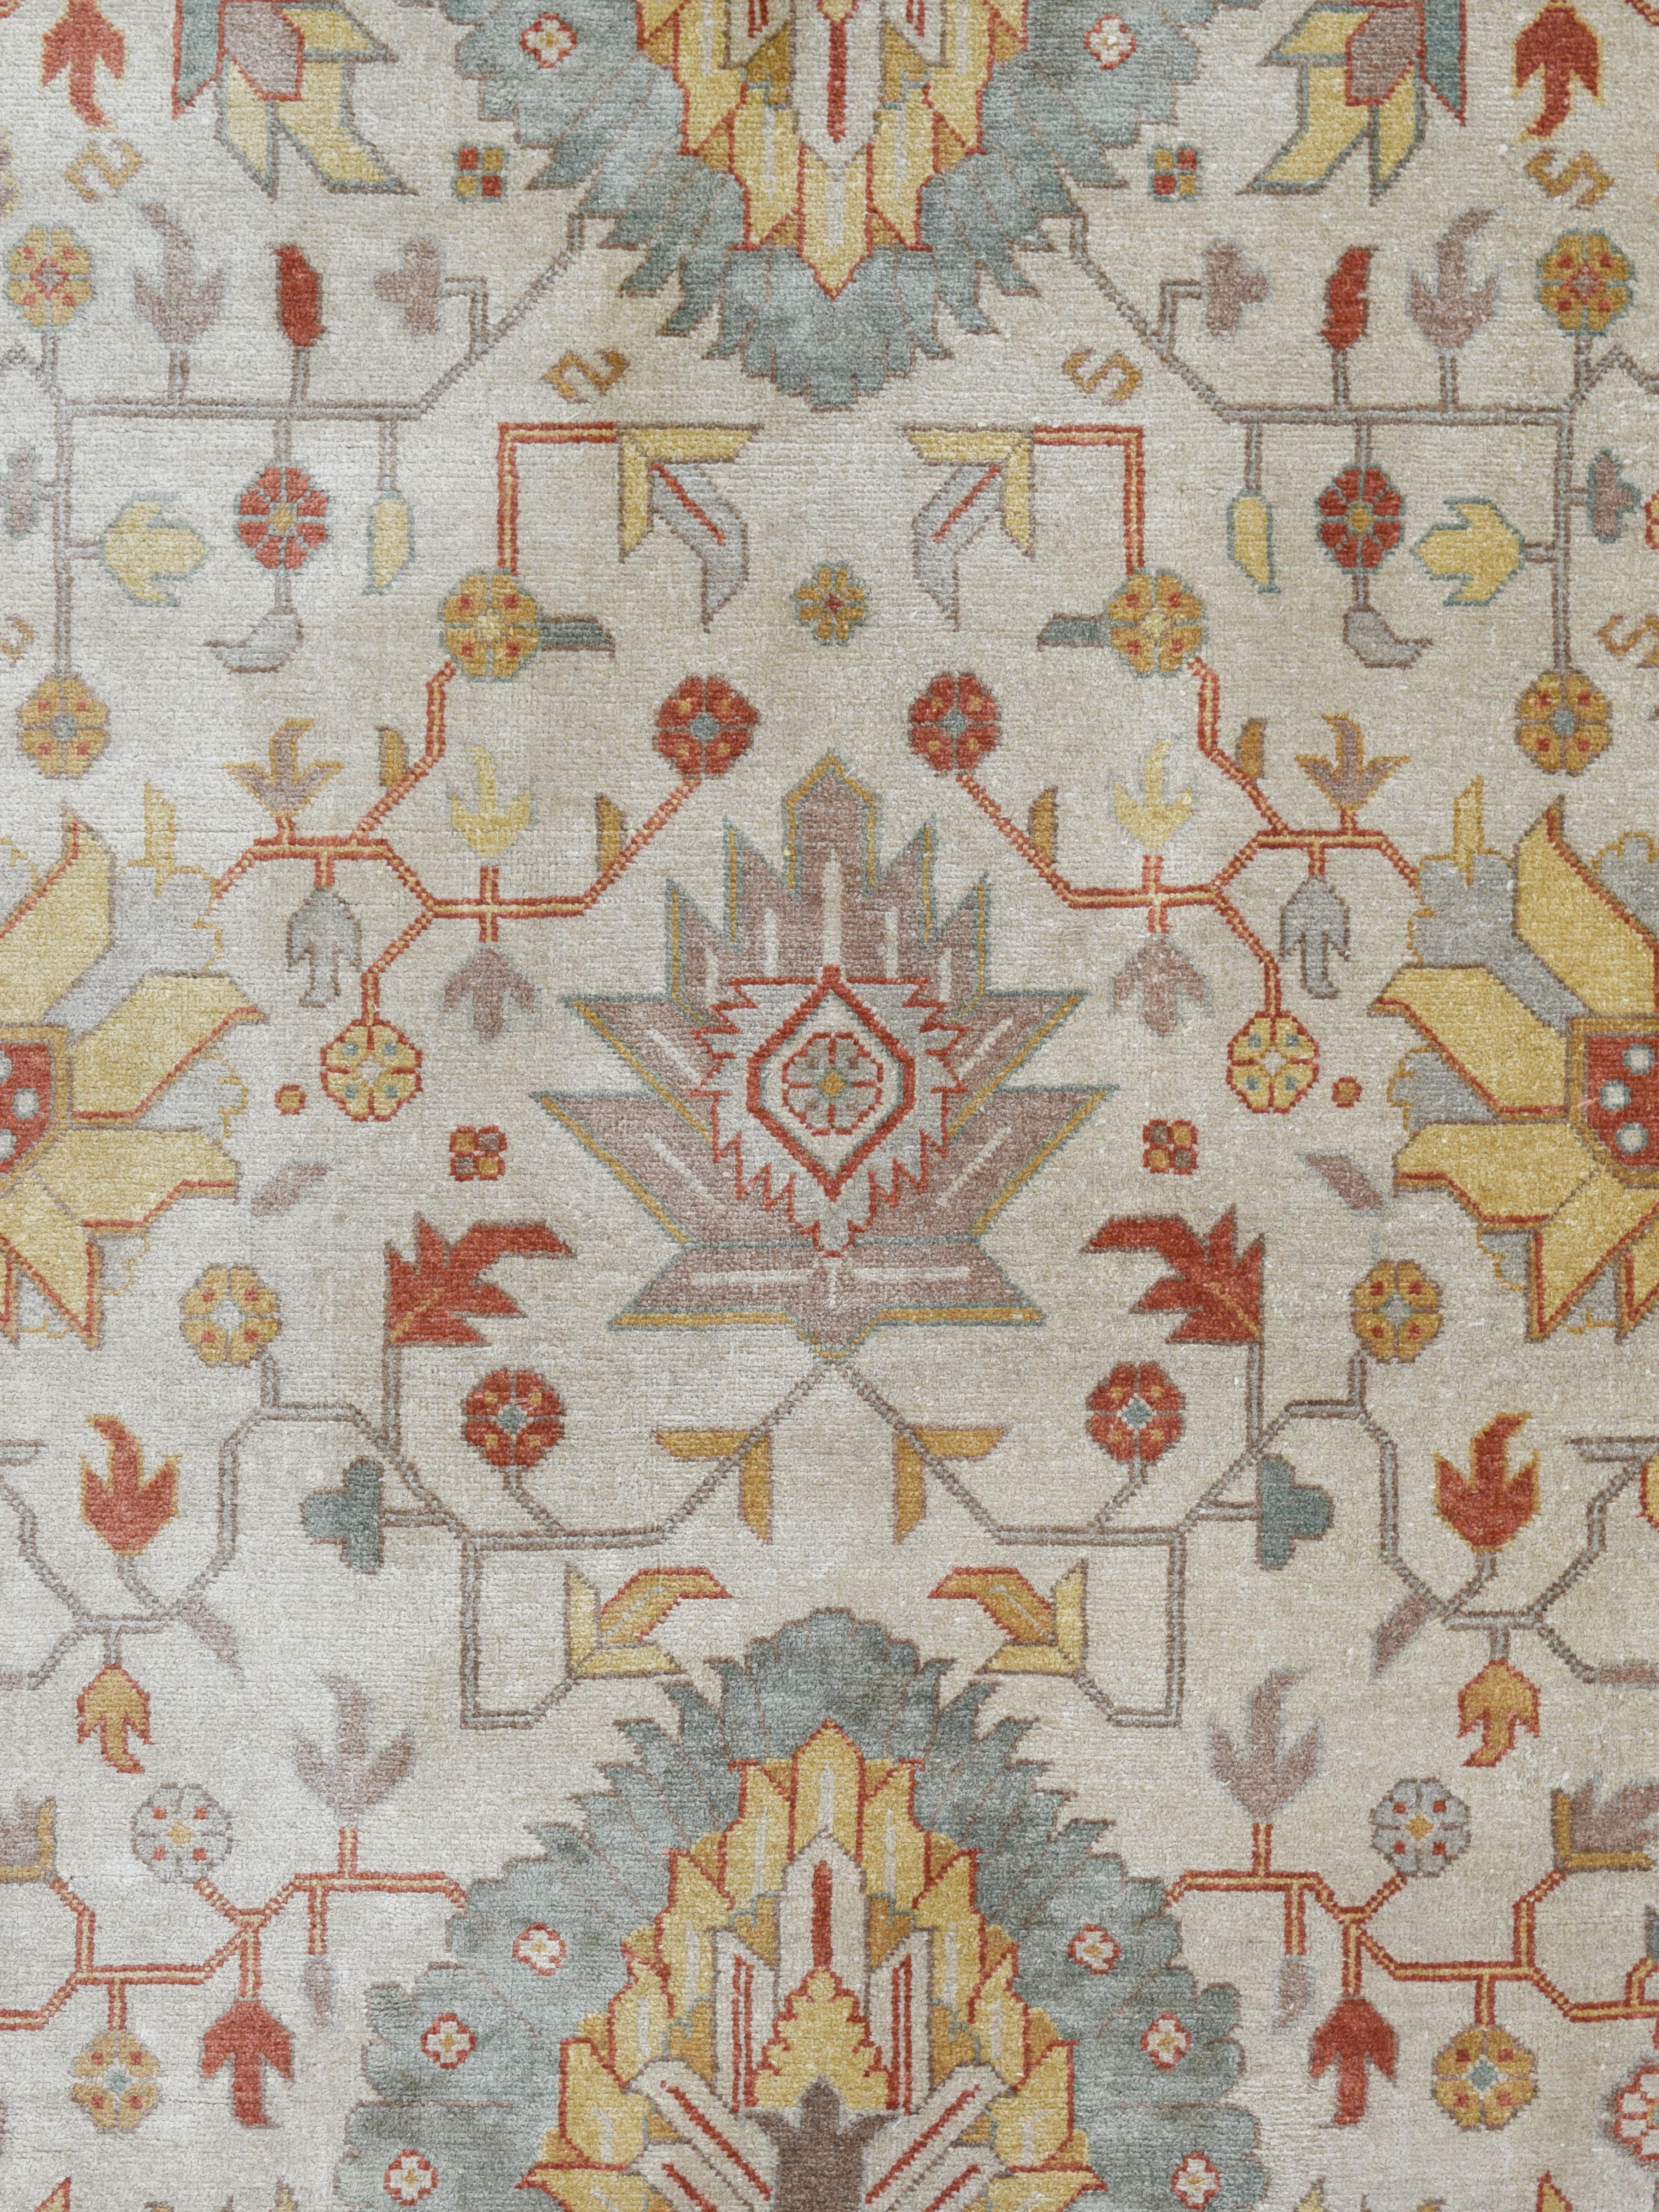 From the Orley Shabahang collection and handknotted in khazar silk, this 5'x7' Persian area rug utilizes a harmonious tableau of cream, gold, and green. The intricate artistry typical of Tabriz designs, featuring thoughtfully placed botanical motifs